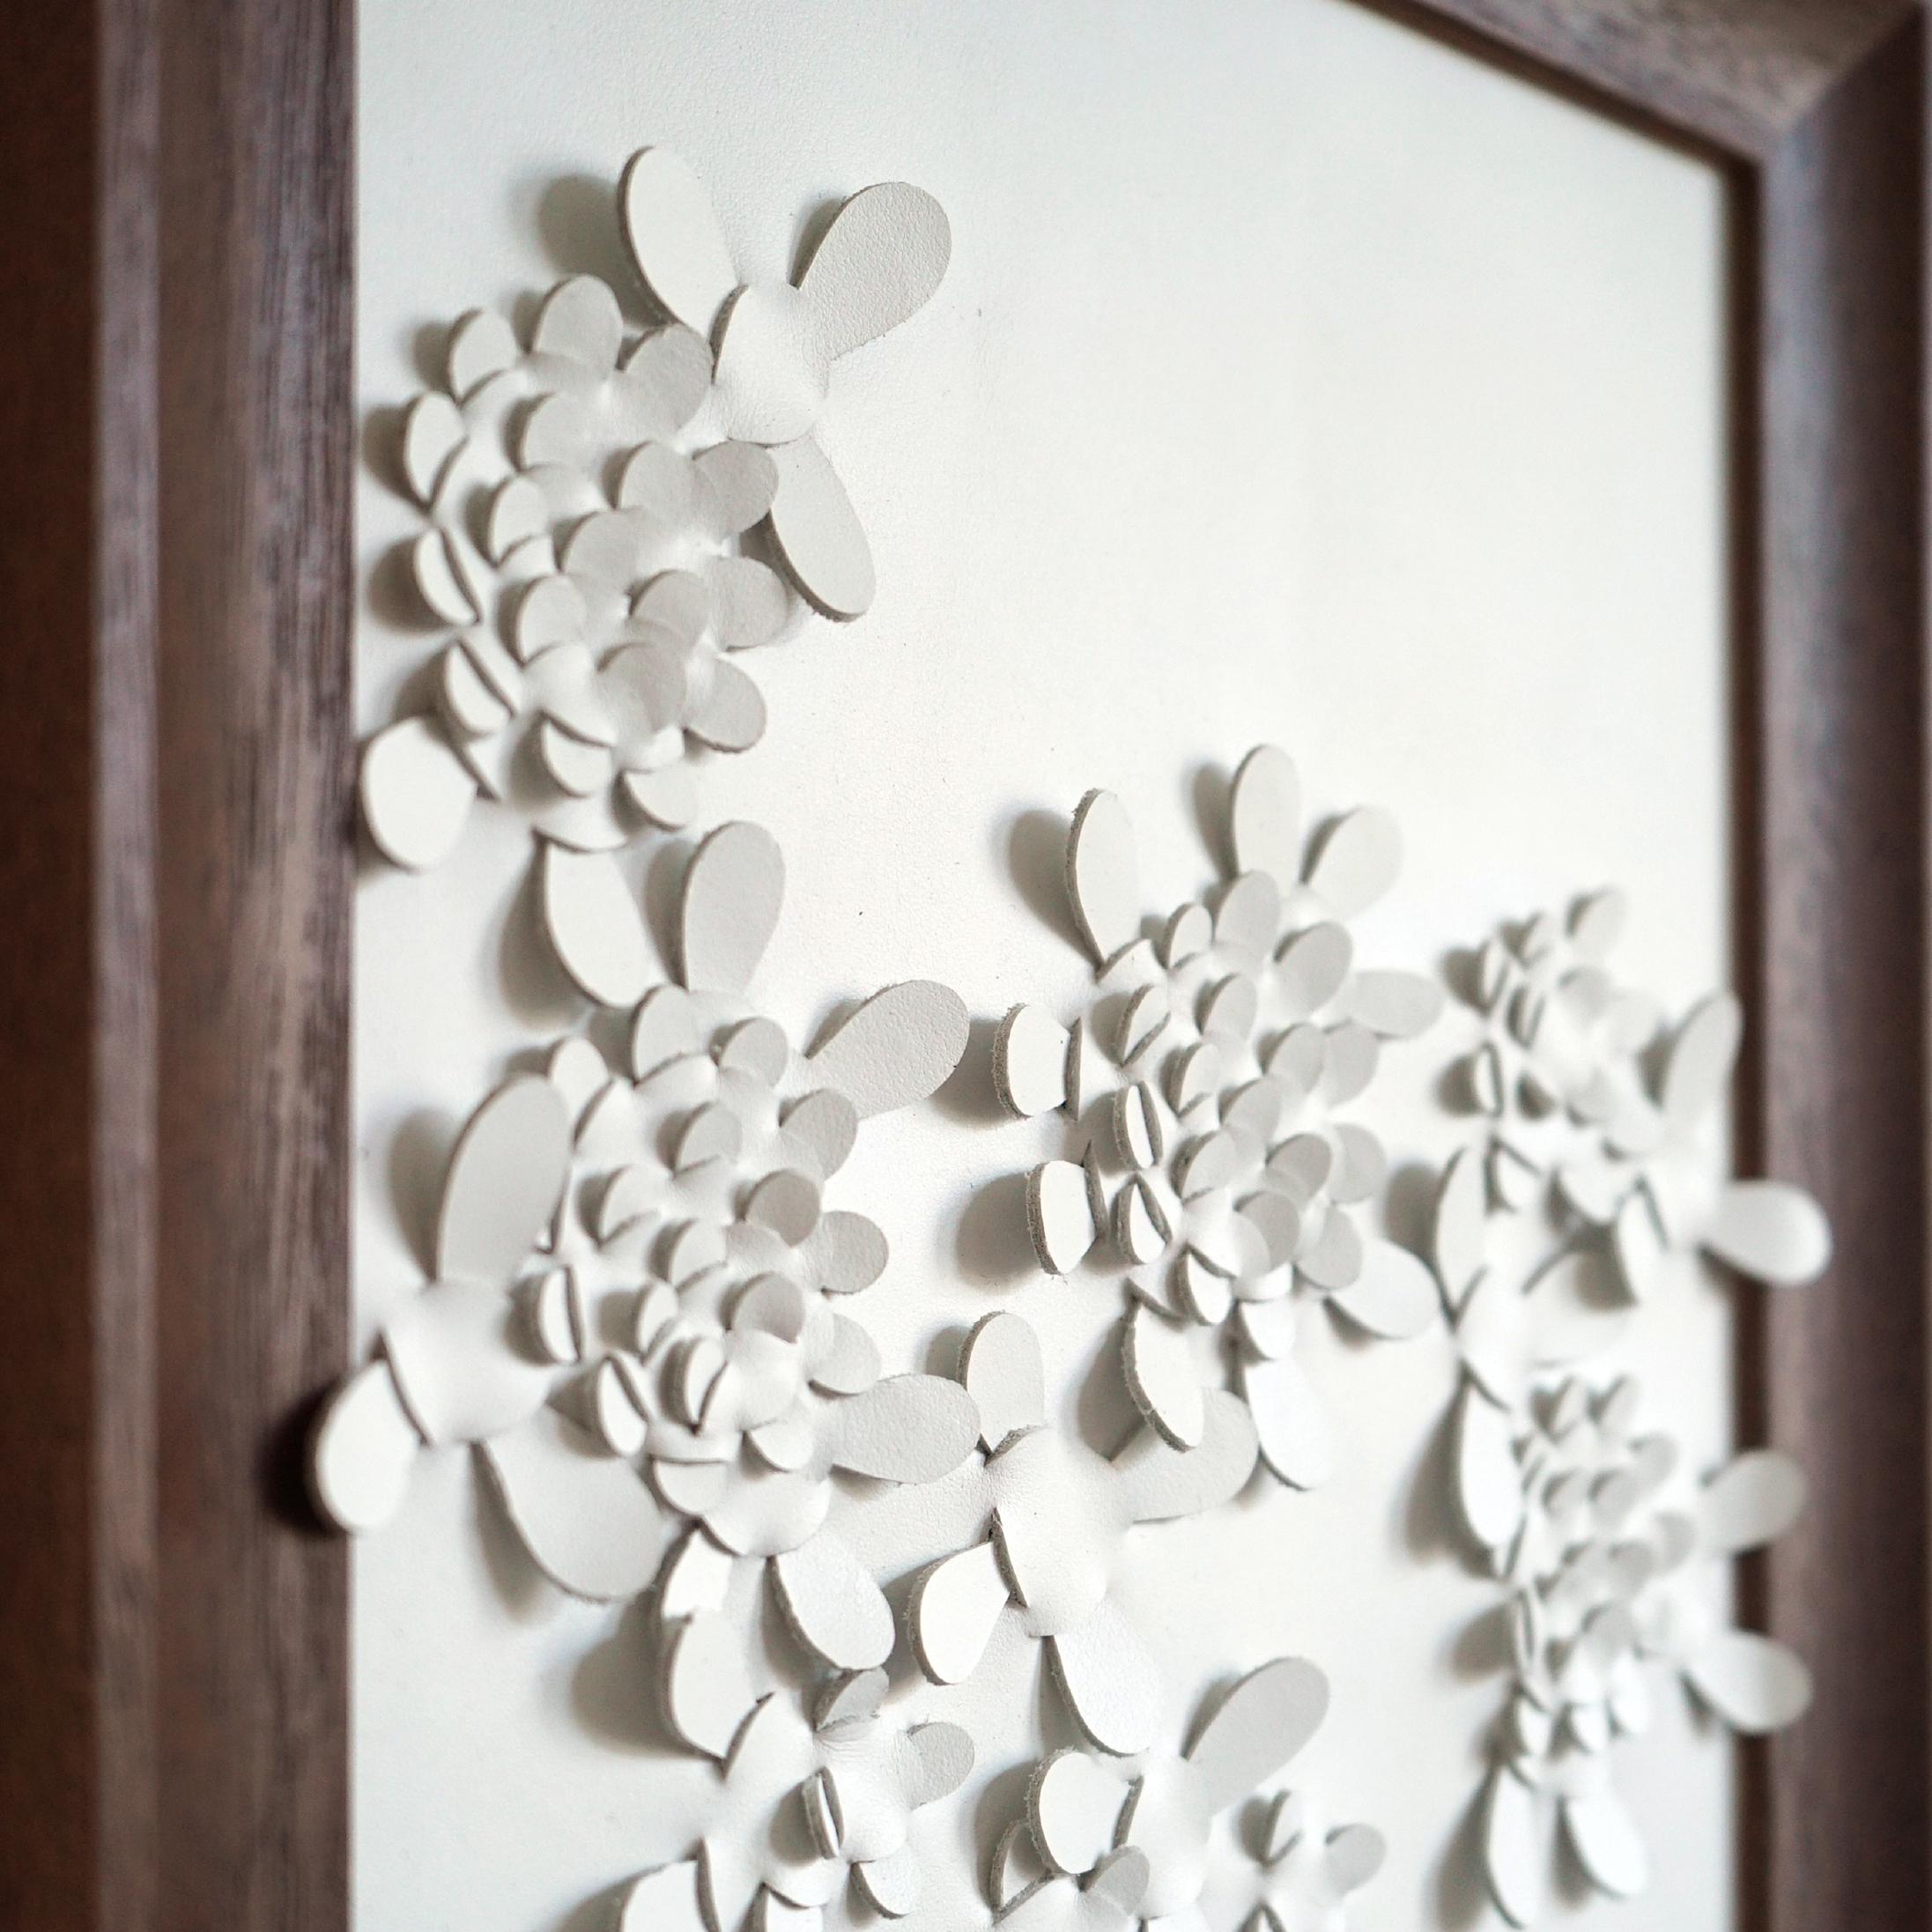 Wildflower:

A piece 3D sculptural of wall art designed and made from two layers of white leather, woven together by Louise Heighes.
Measurements are 11.6 x 14 inches or 29.5 x 35.5 cm

This piece is inspired by the striking yellow wildflower and